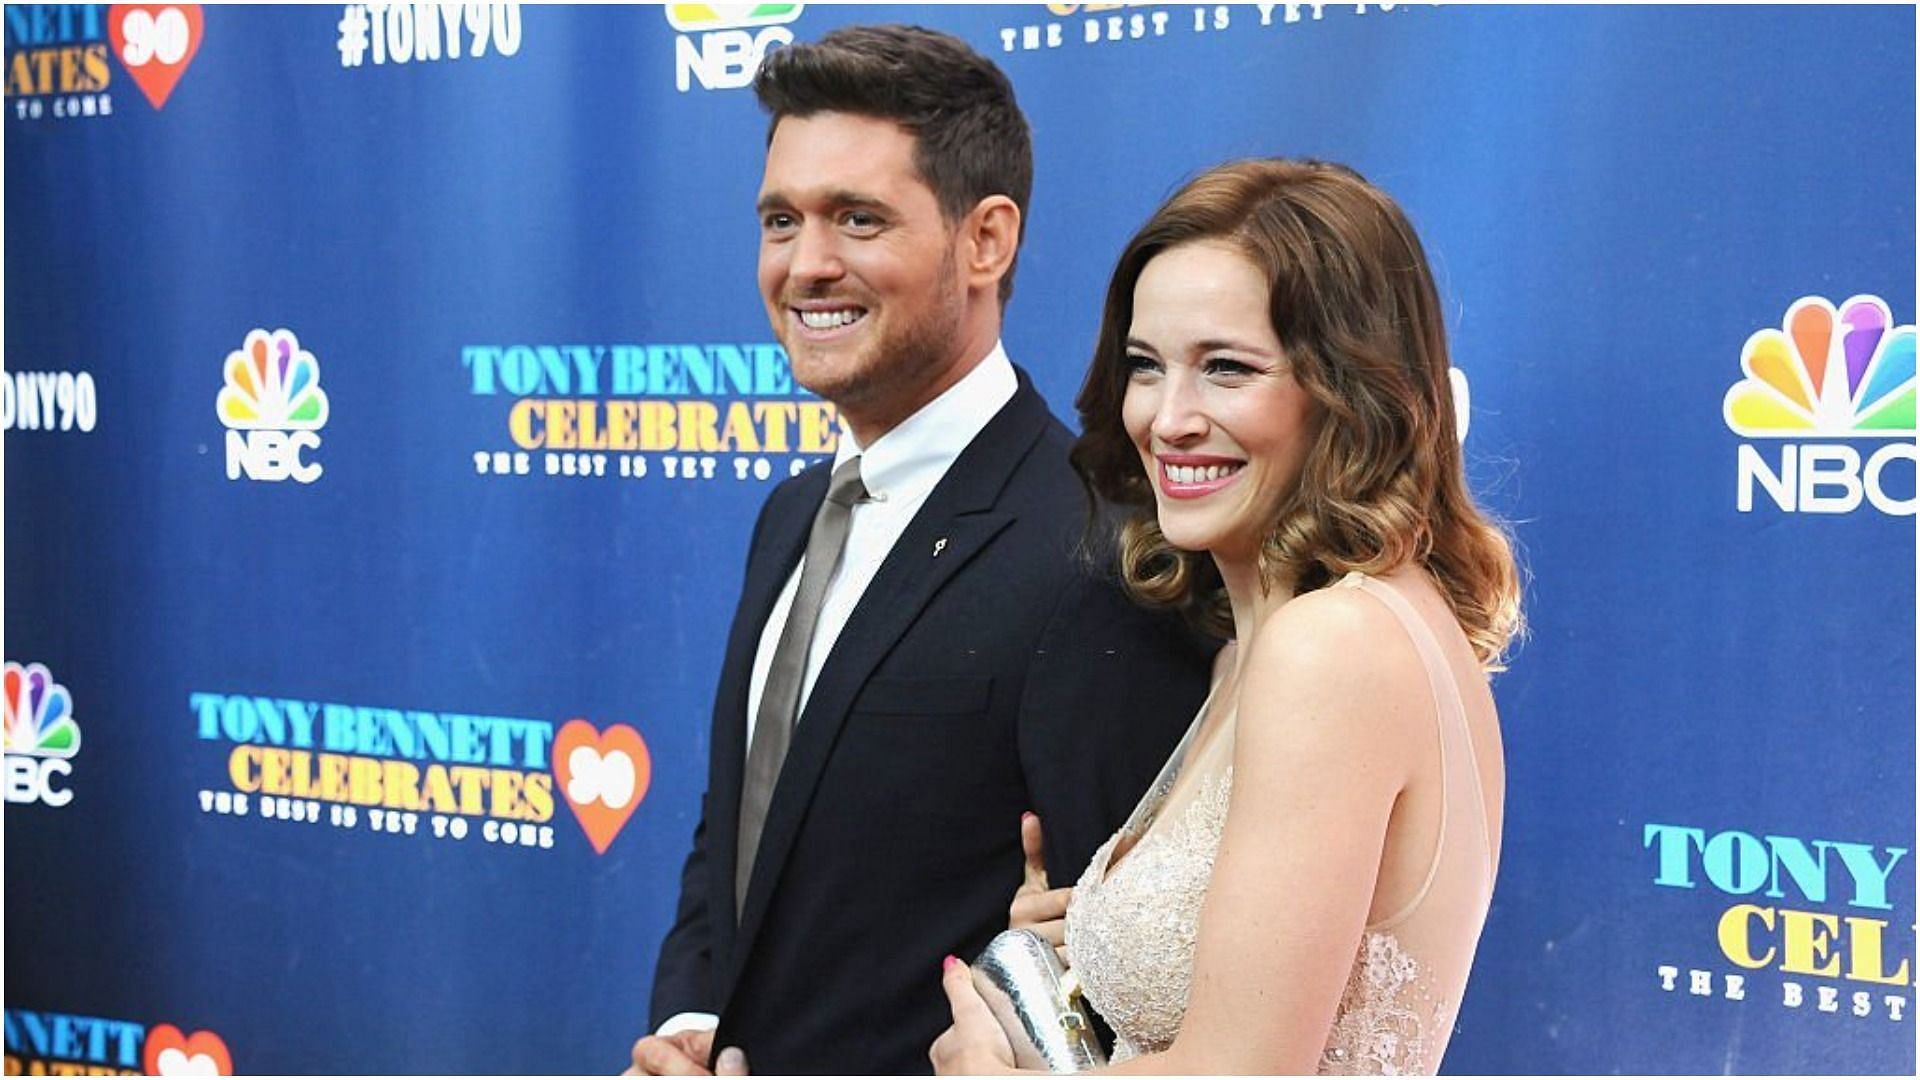 Michael Bubl&eacute; and Luisana Lopilato attend an event at Radio City Music Hall (Image via Getty Images/Gary Gershoff)